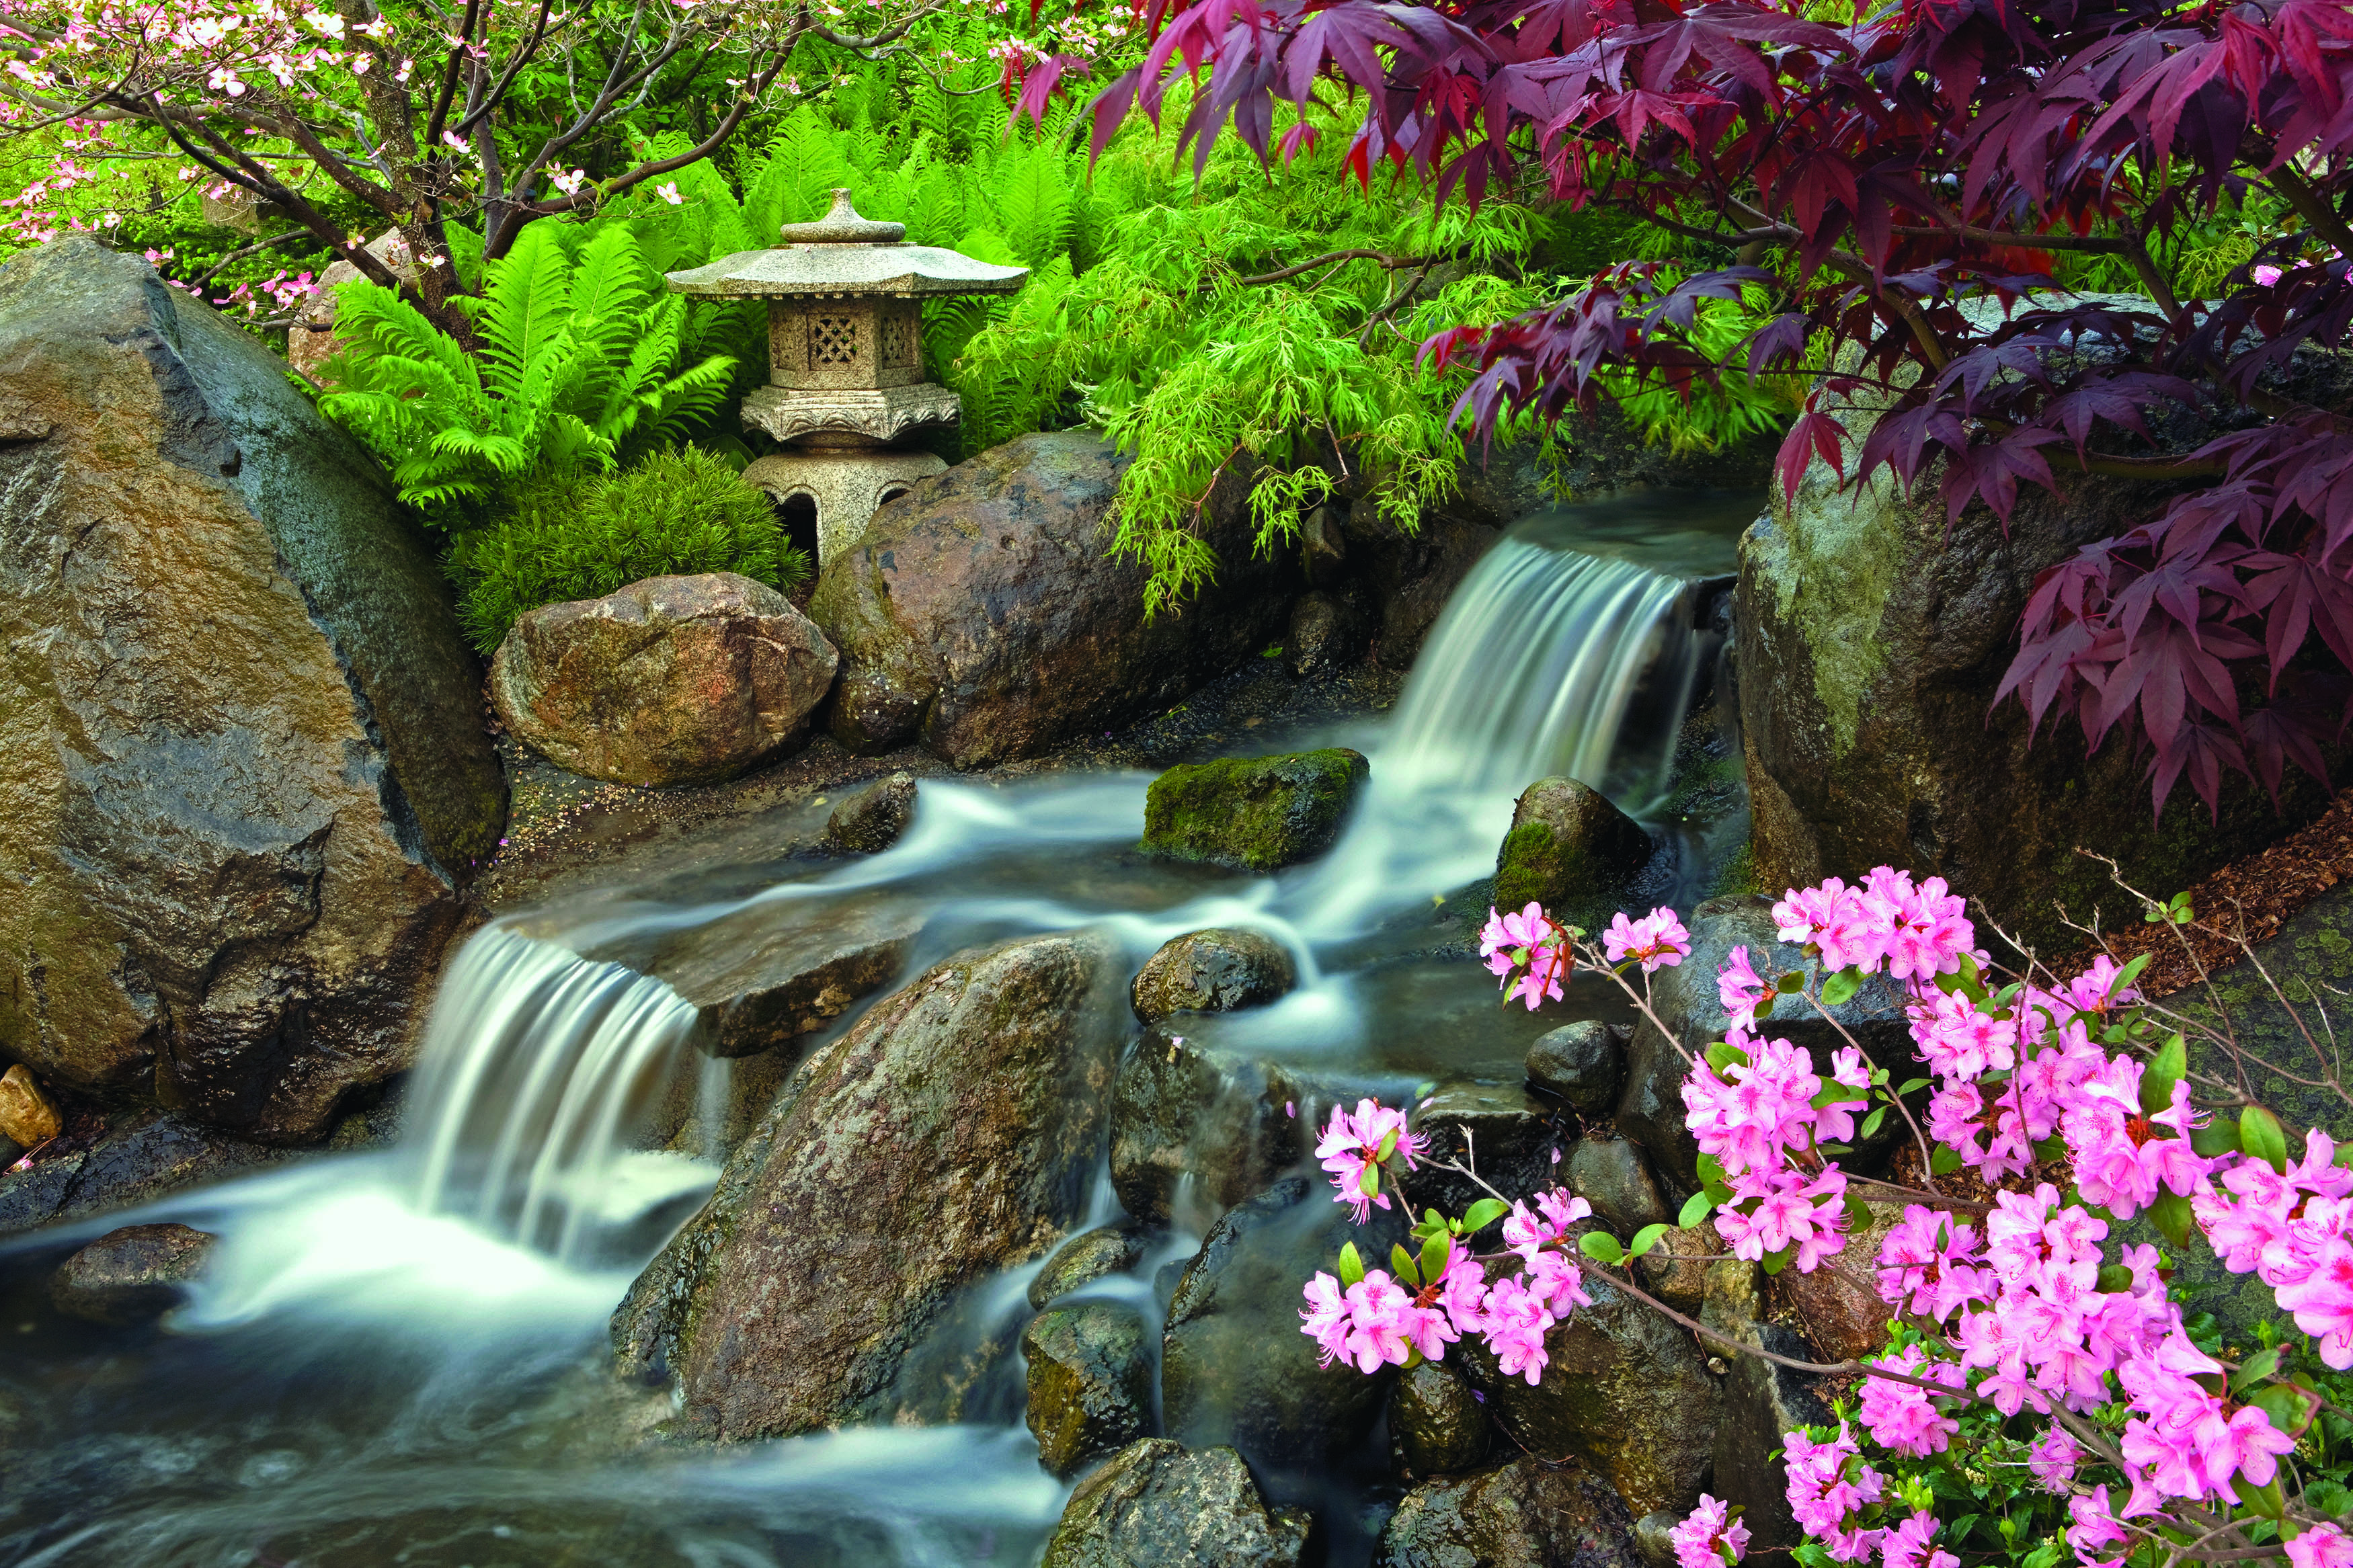 A waterfall in a Japanese garden, with bright green foliage in the background and bright pink flowers in the foreground.